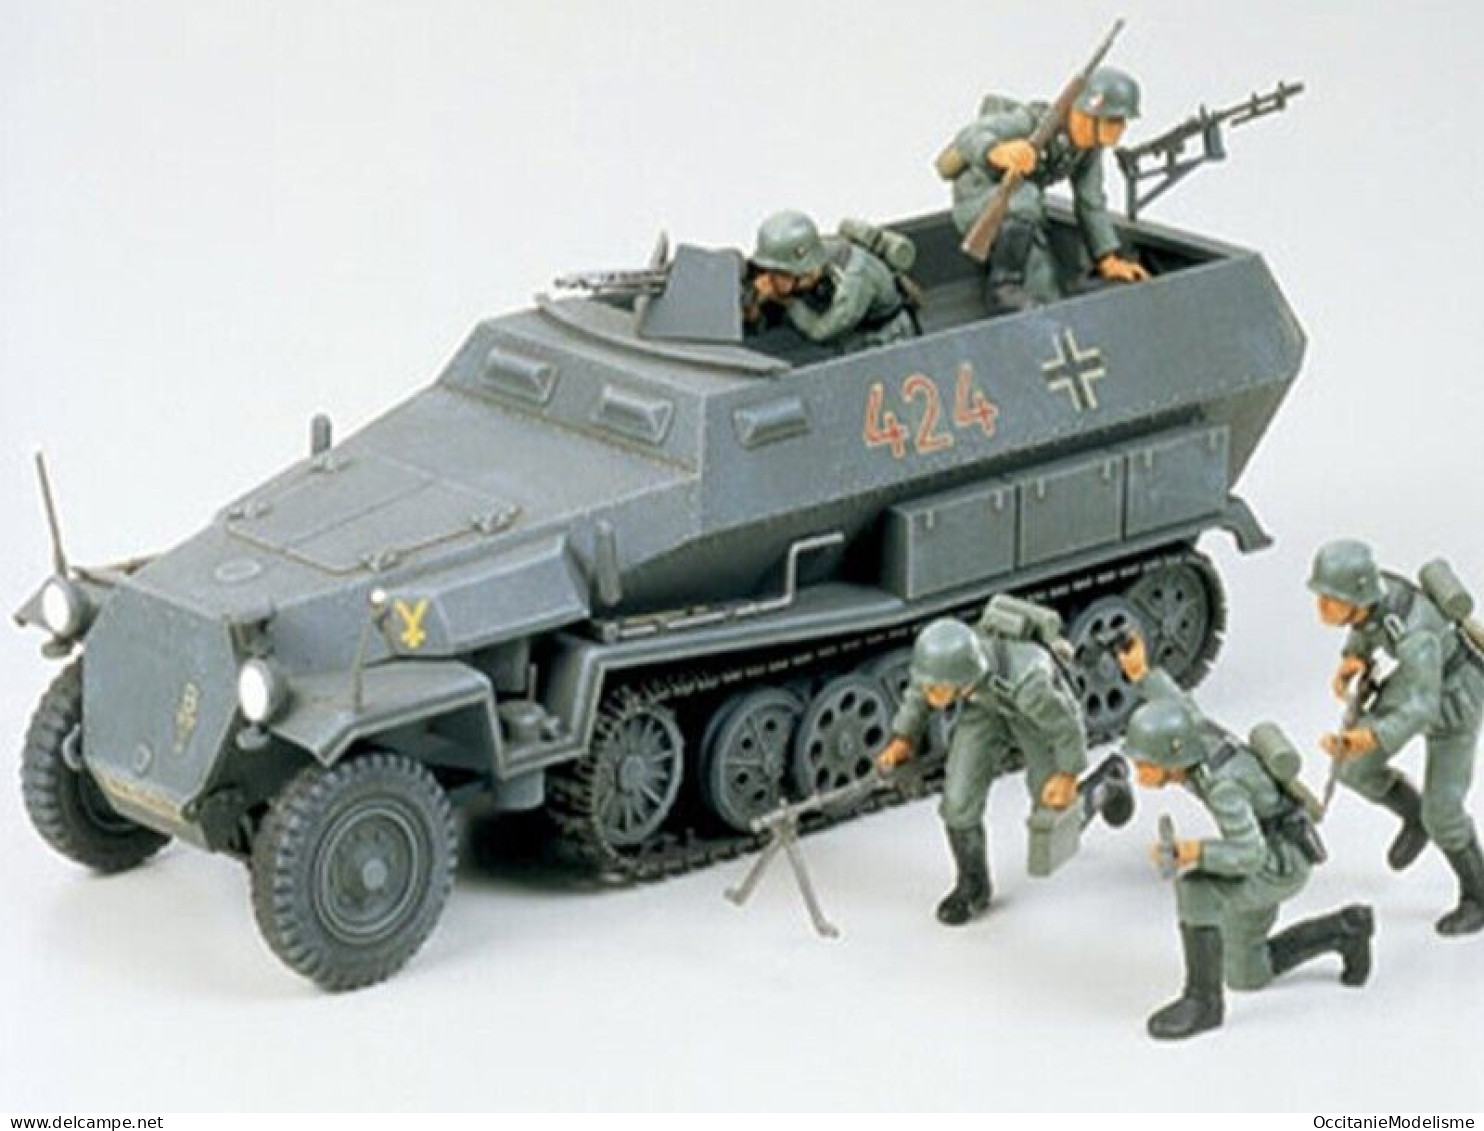 Tamiya - HANOMAG Sdkfz 251/1 + 5 Figurines WWII Militaire Maquette Kit Plastique Réf. 35020 BO 1/35 - Military Vehicles